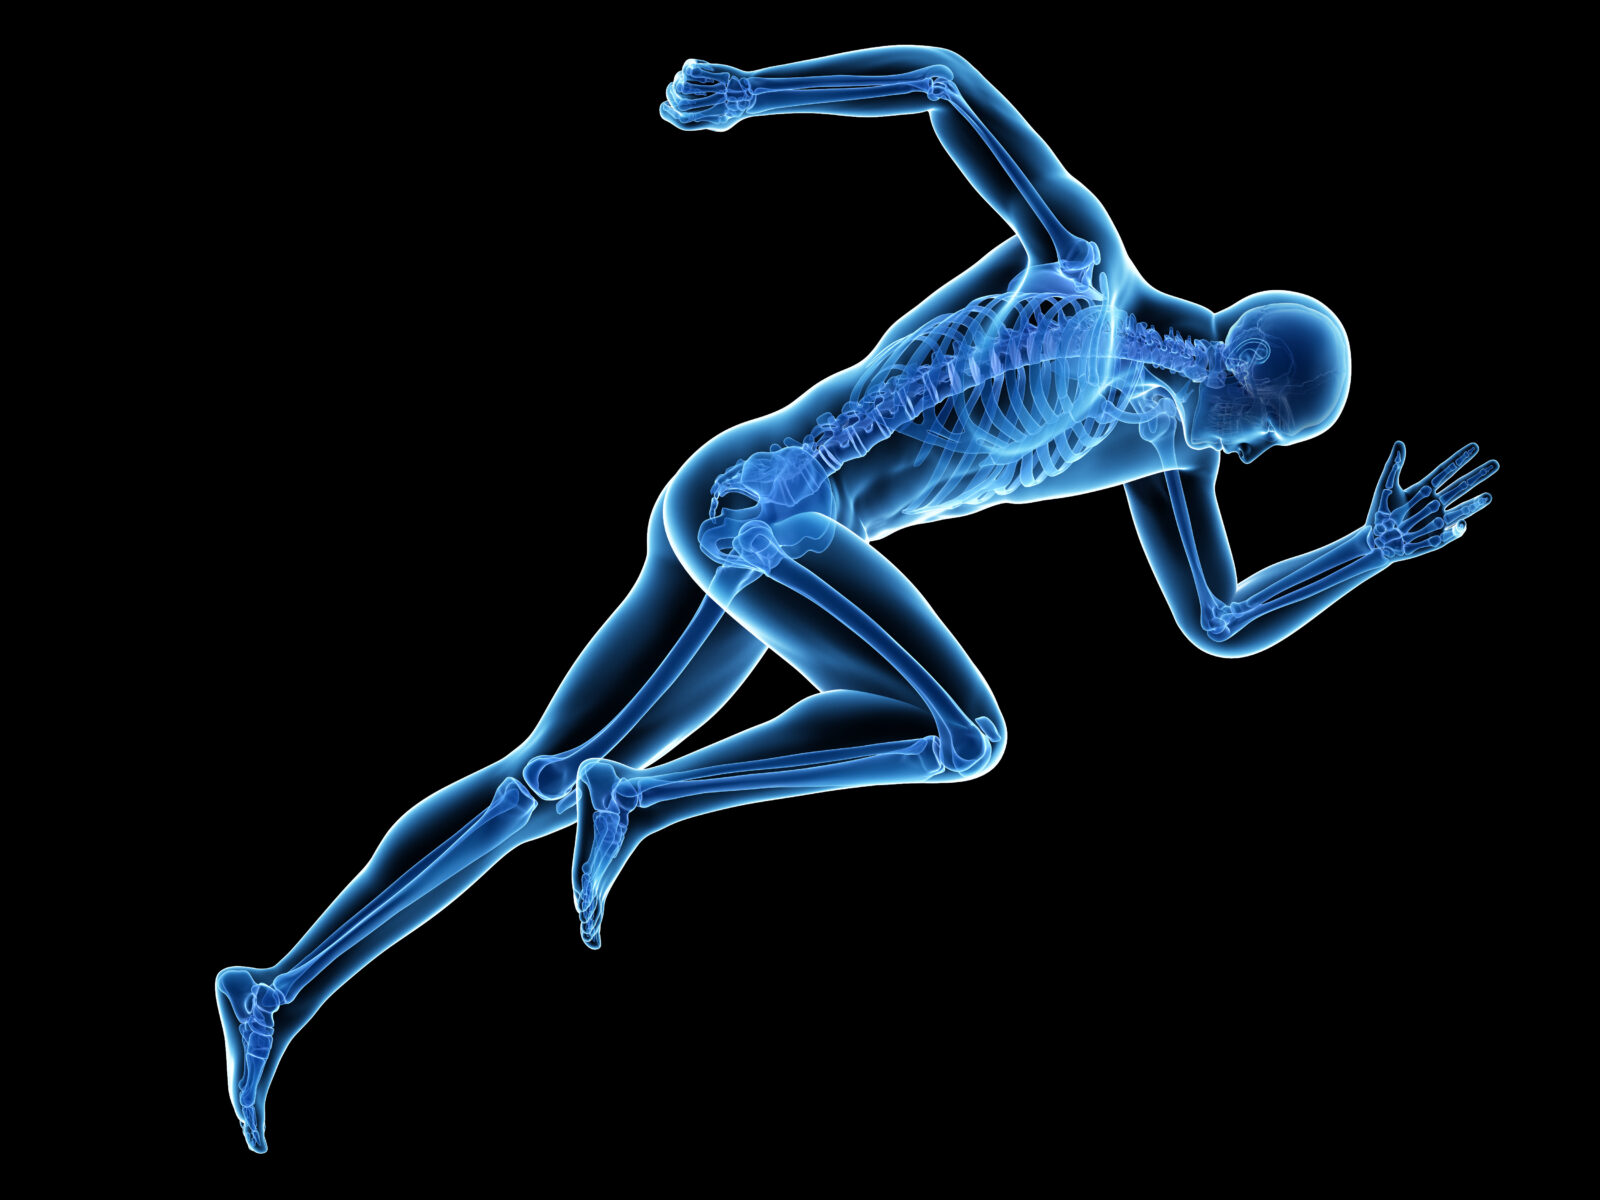 3d rendered medically accurate illustration of a sprinter